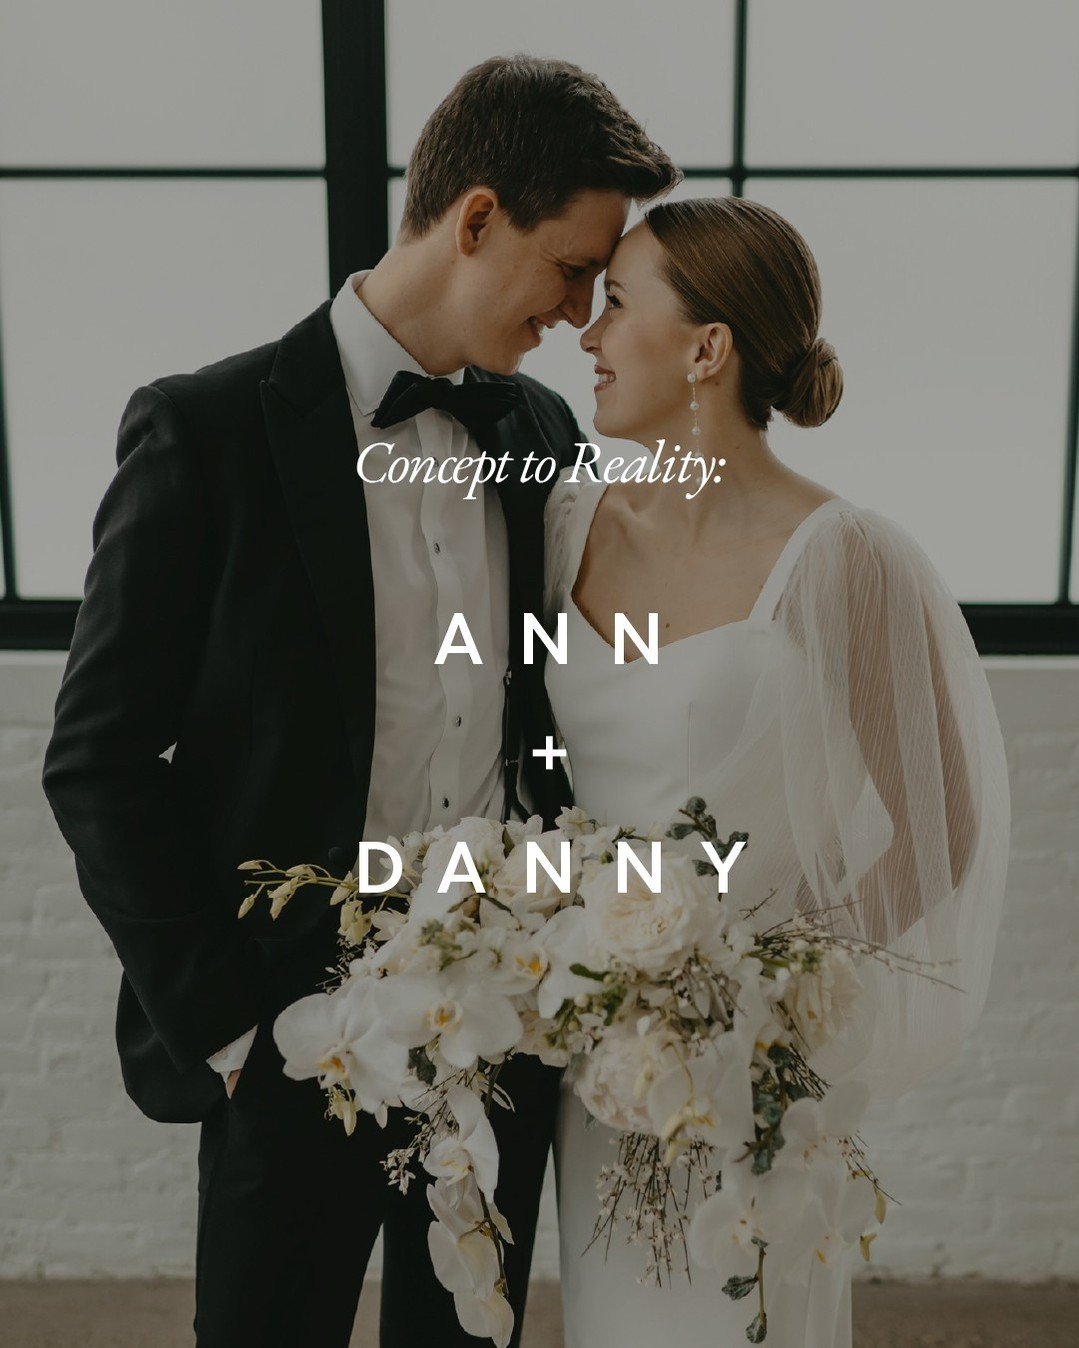 How we took Ann + Danny's New Year's Eve Wedding Day from concept &rarr; reality ⁠
⁠
Venue + Bar | @thewhimevents⁠
Catering | @chowgirlscatering⁠
Planning | @lainepalmplanning ⁠
Photography | @katherinechapmanphoto⁠
Floral | @studiocfloral⁠
Stationer